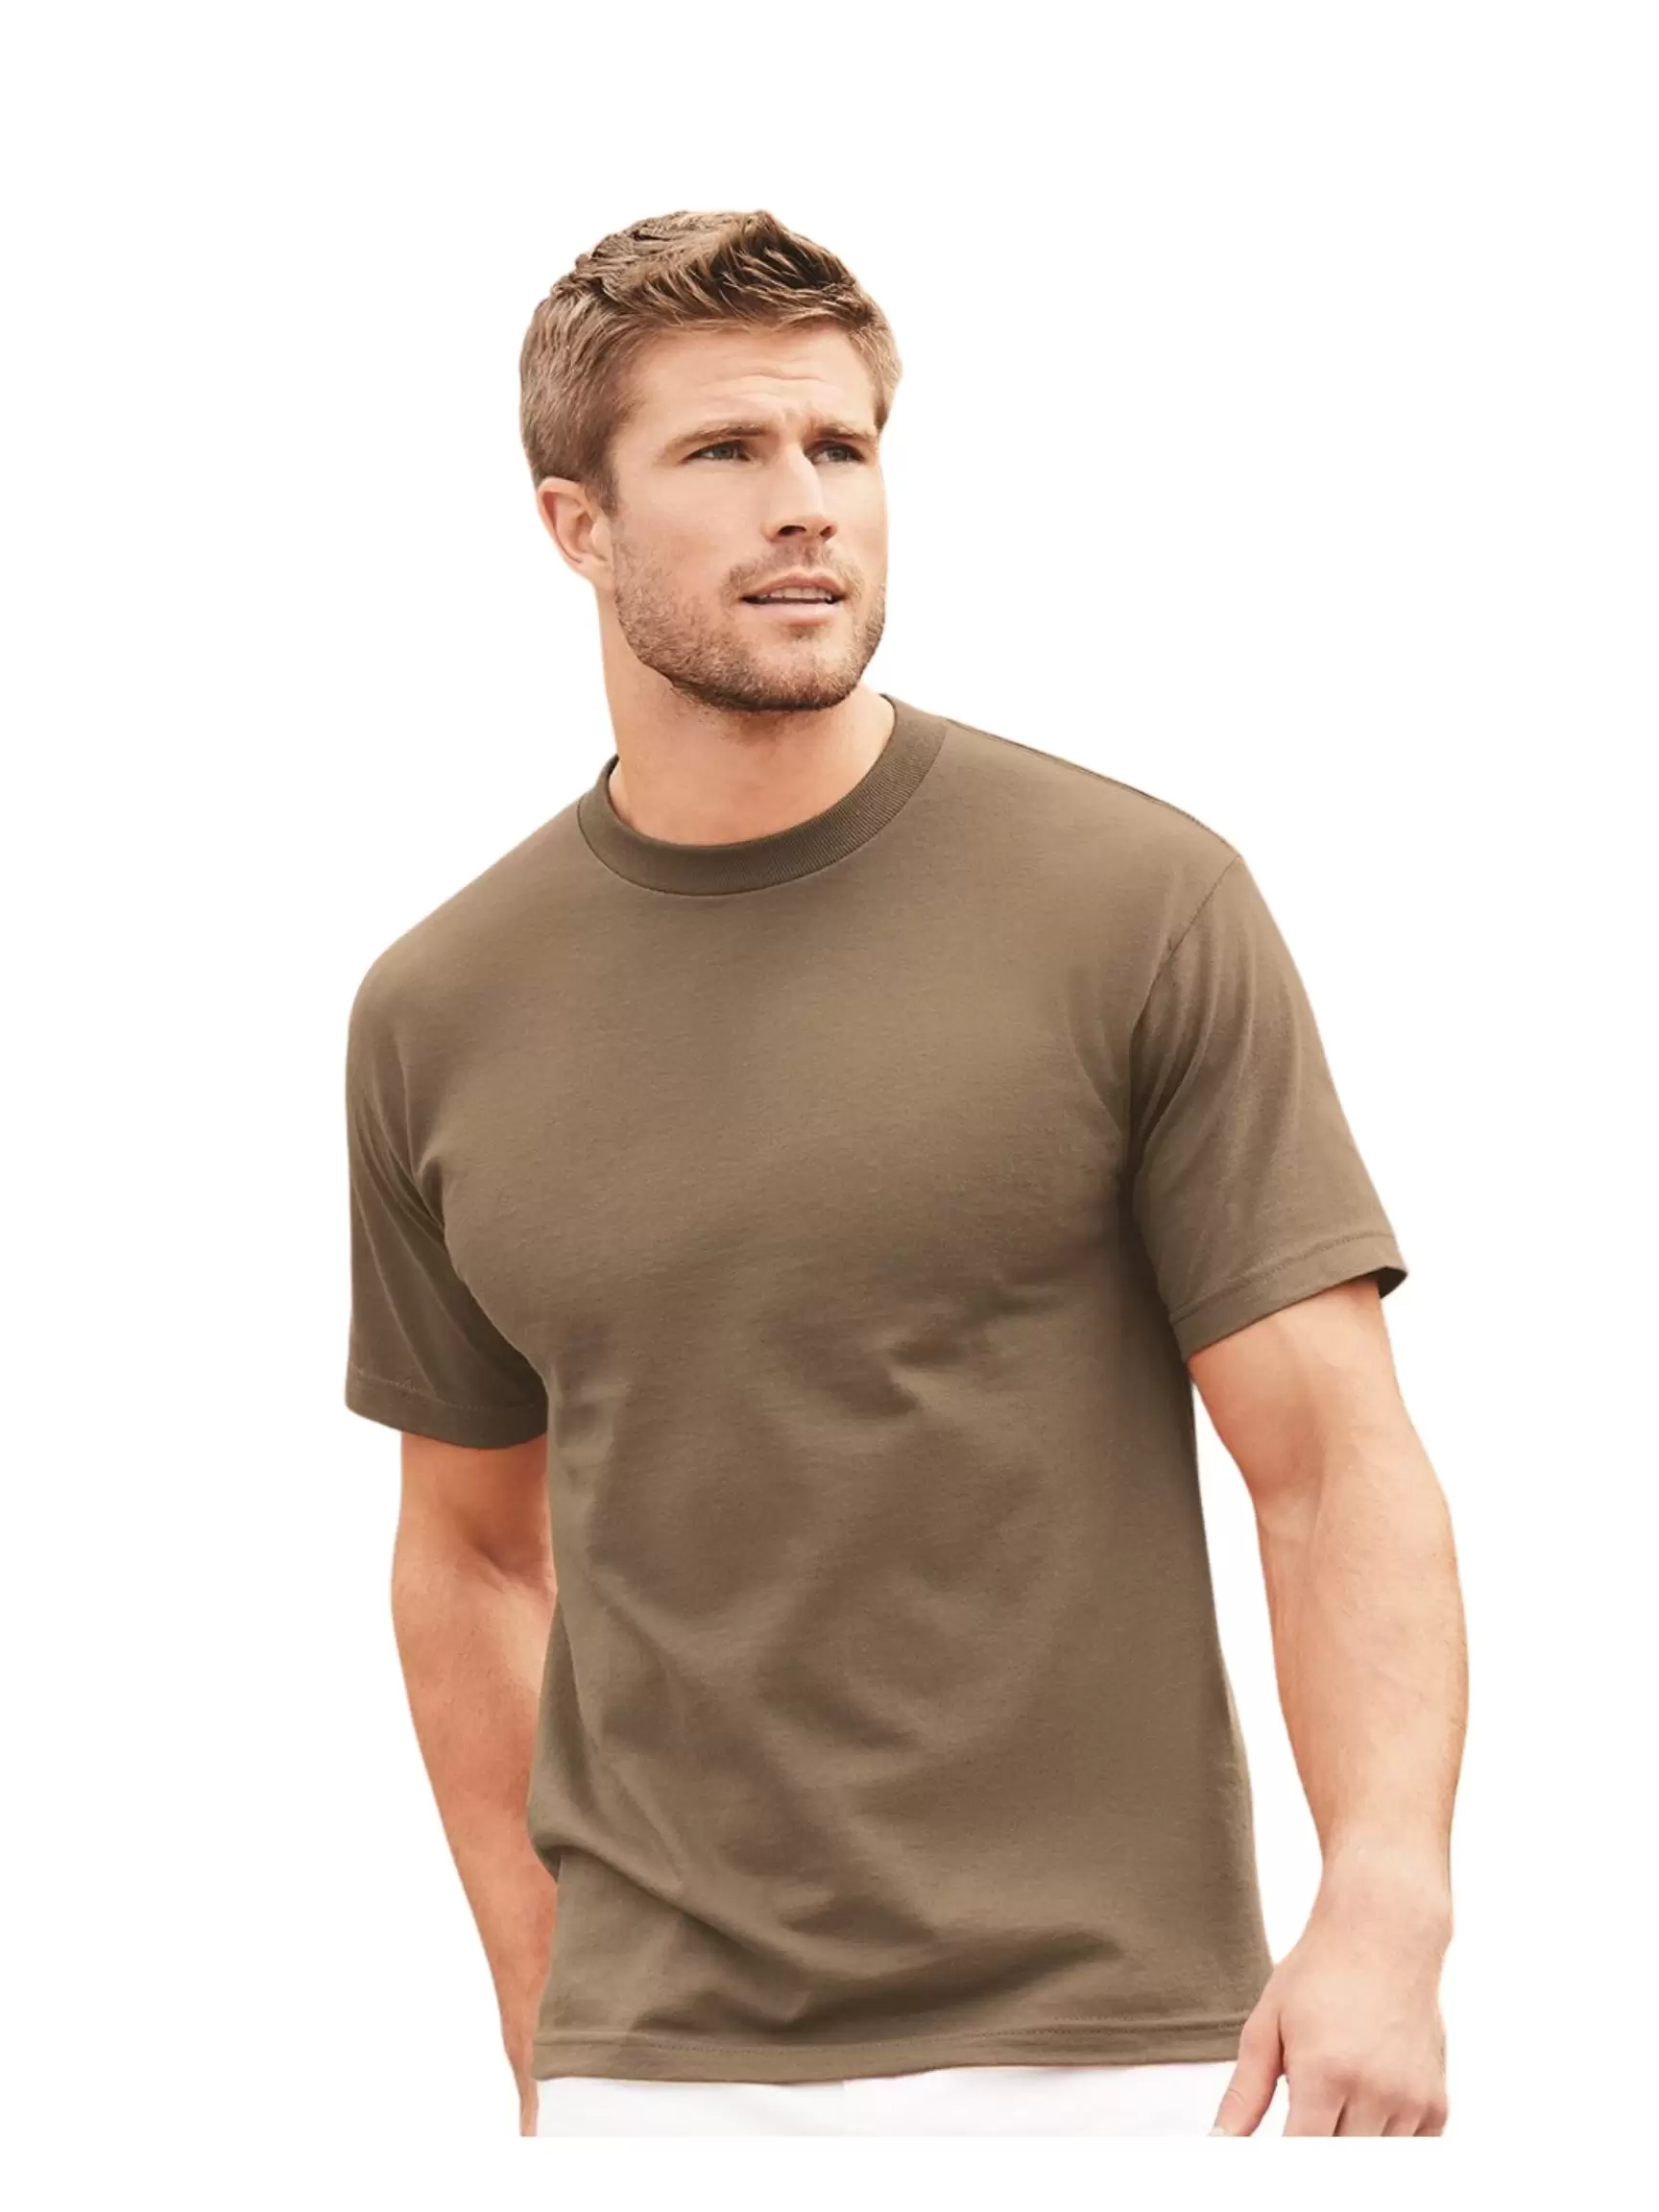 Alstyle 1301 by American Apparel Heavyweight T Shirt - Blankstyle